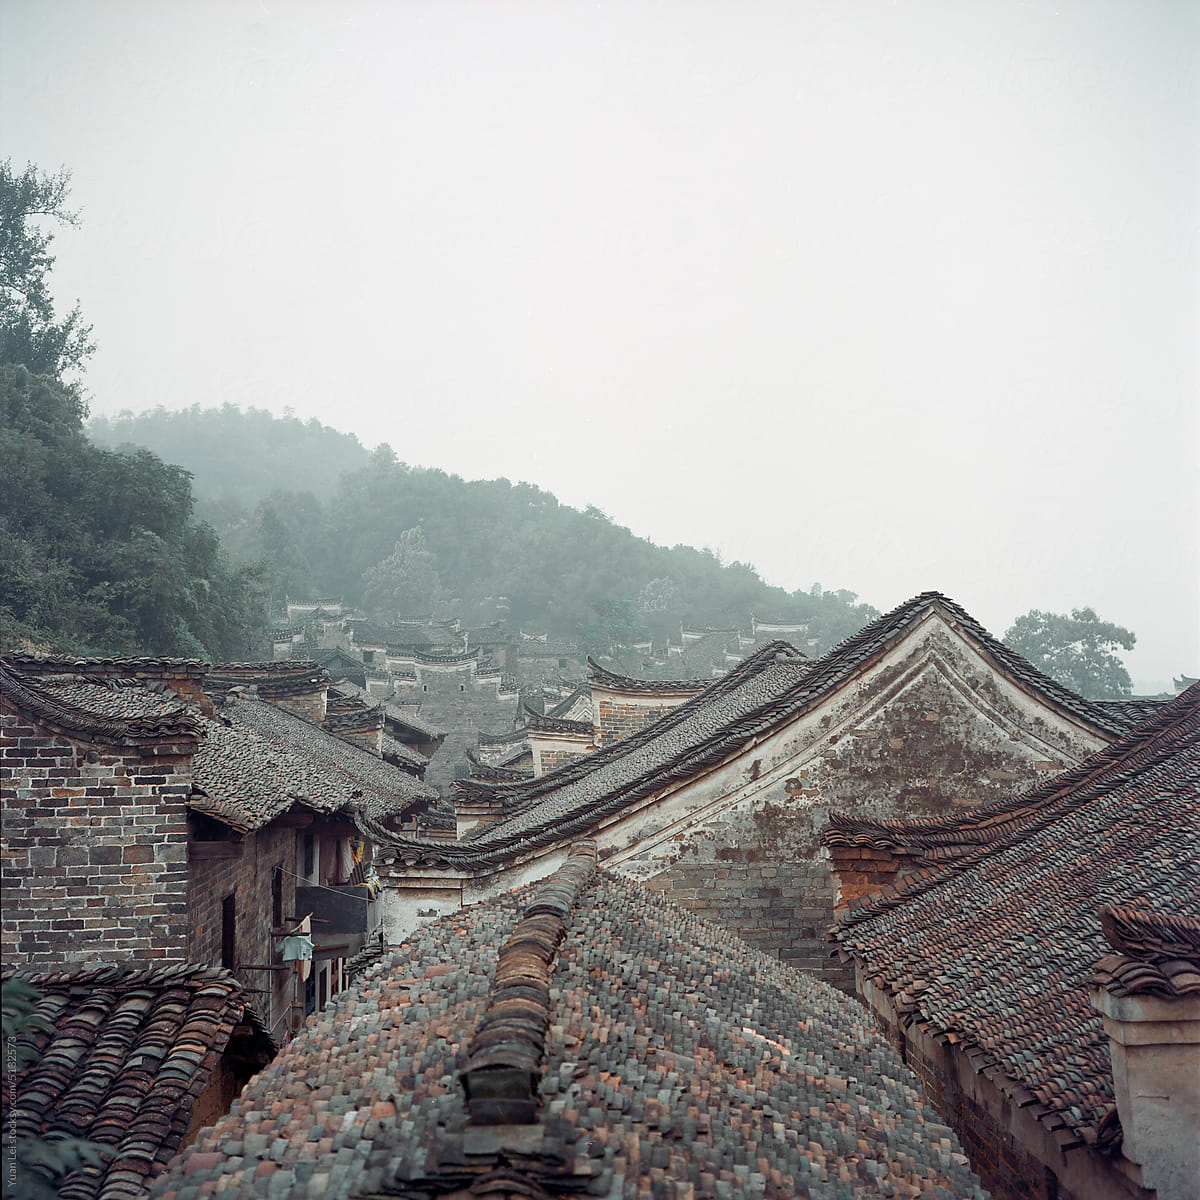 Roof of ancient buildings